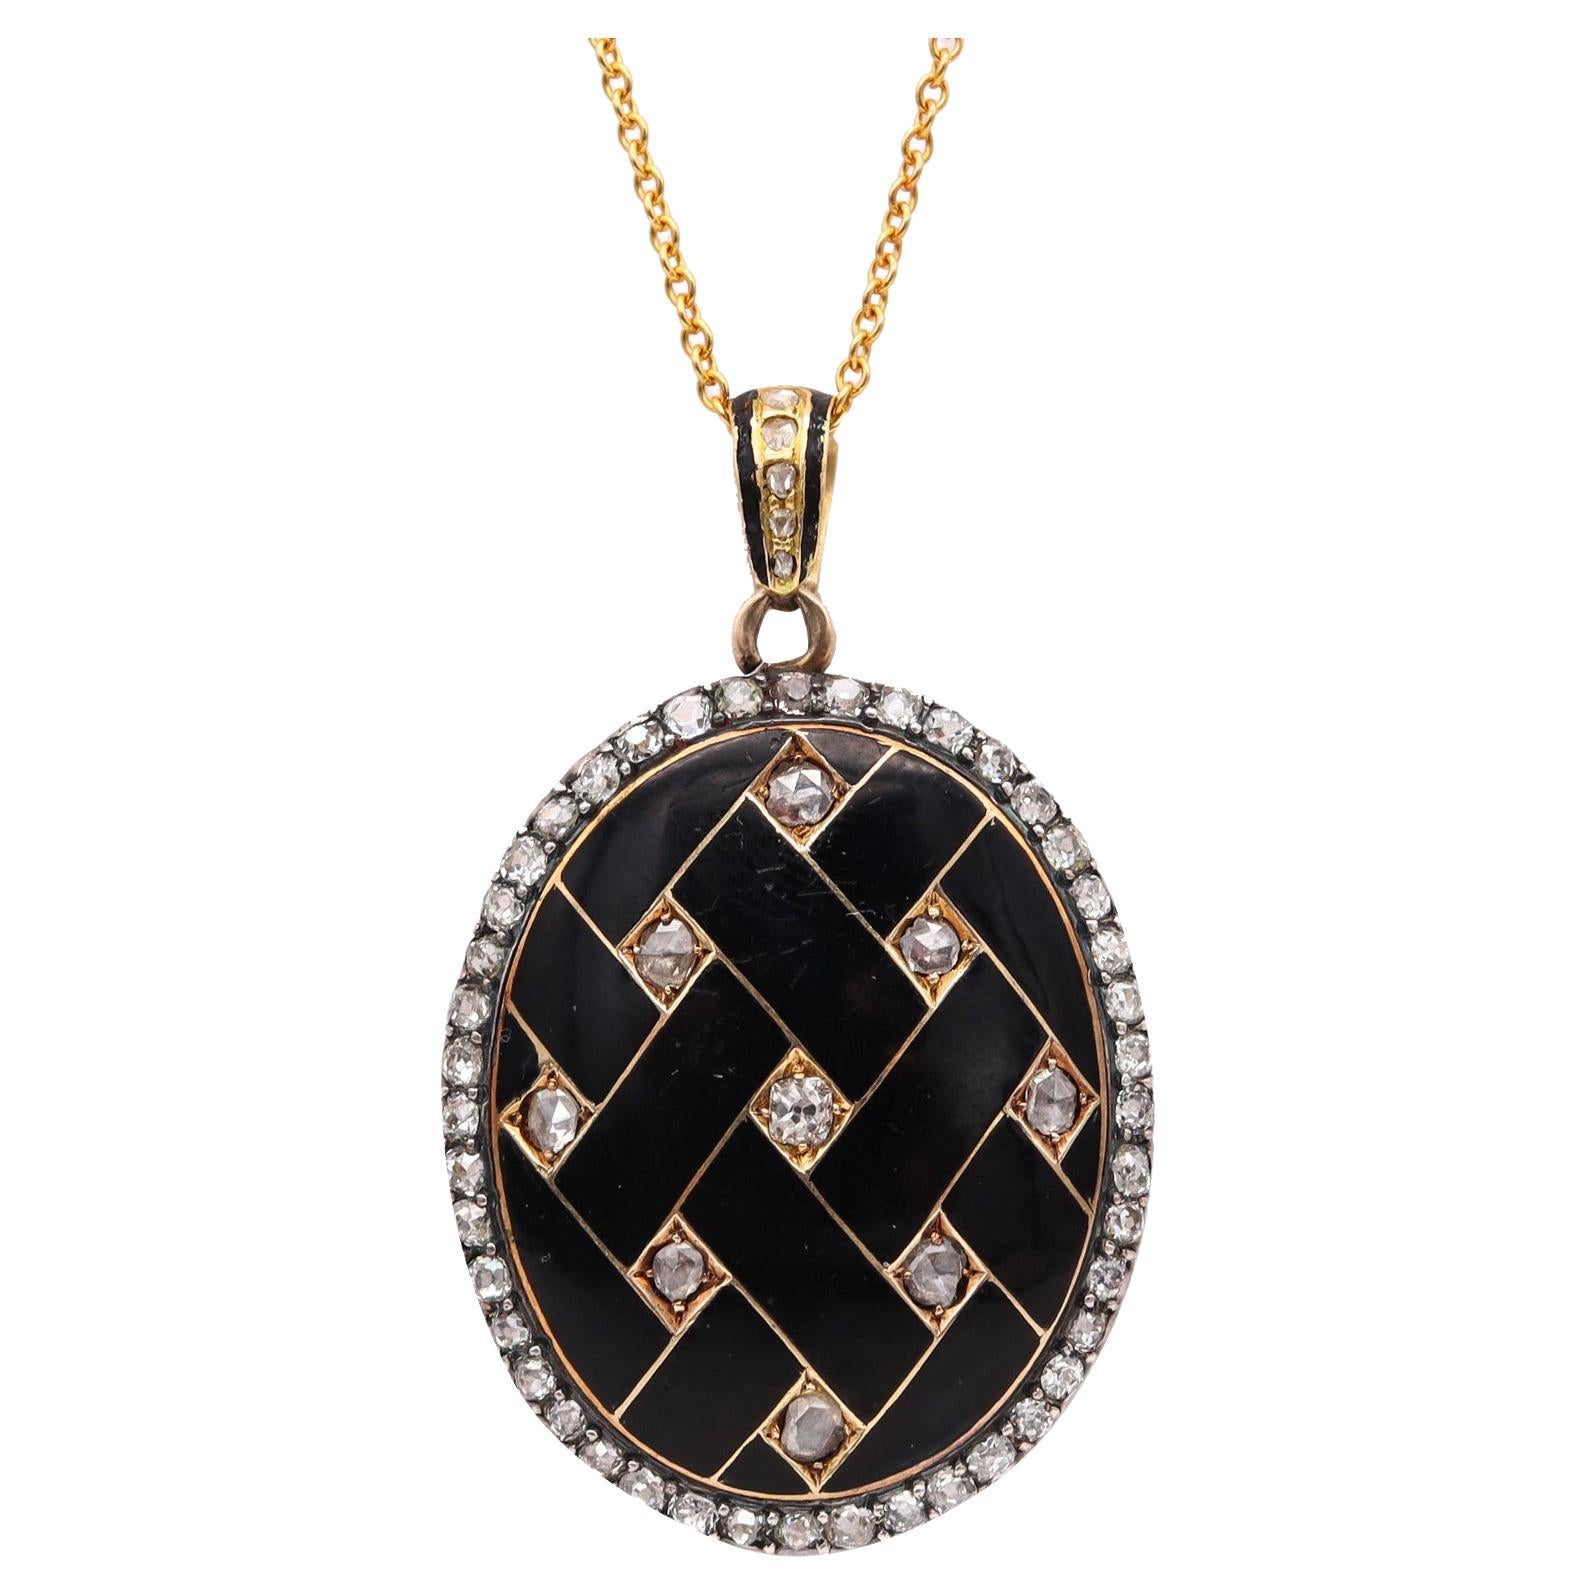 Victorian 1870 Geometric Enameled Oval Pendant Locket in 18kt Gold with Diamonds